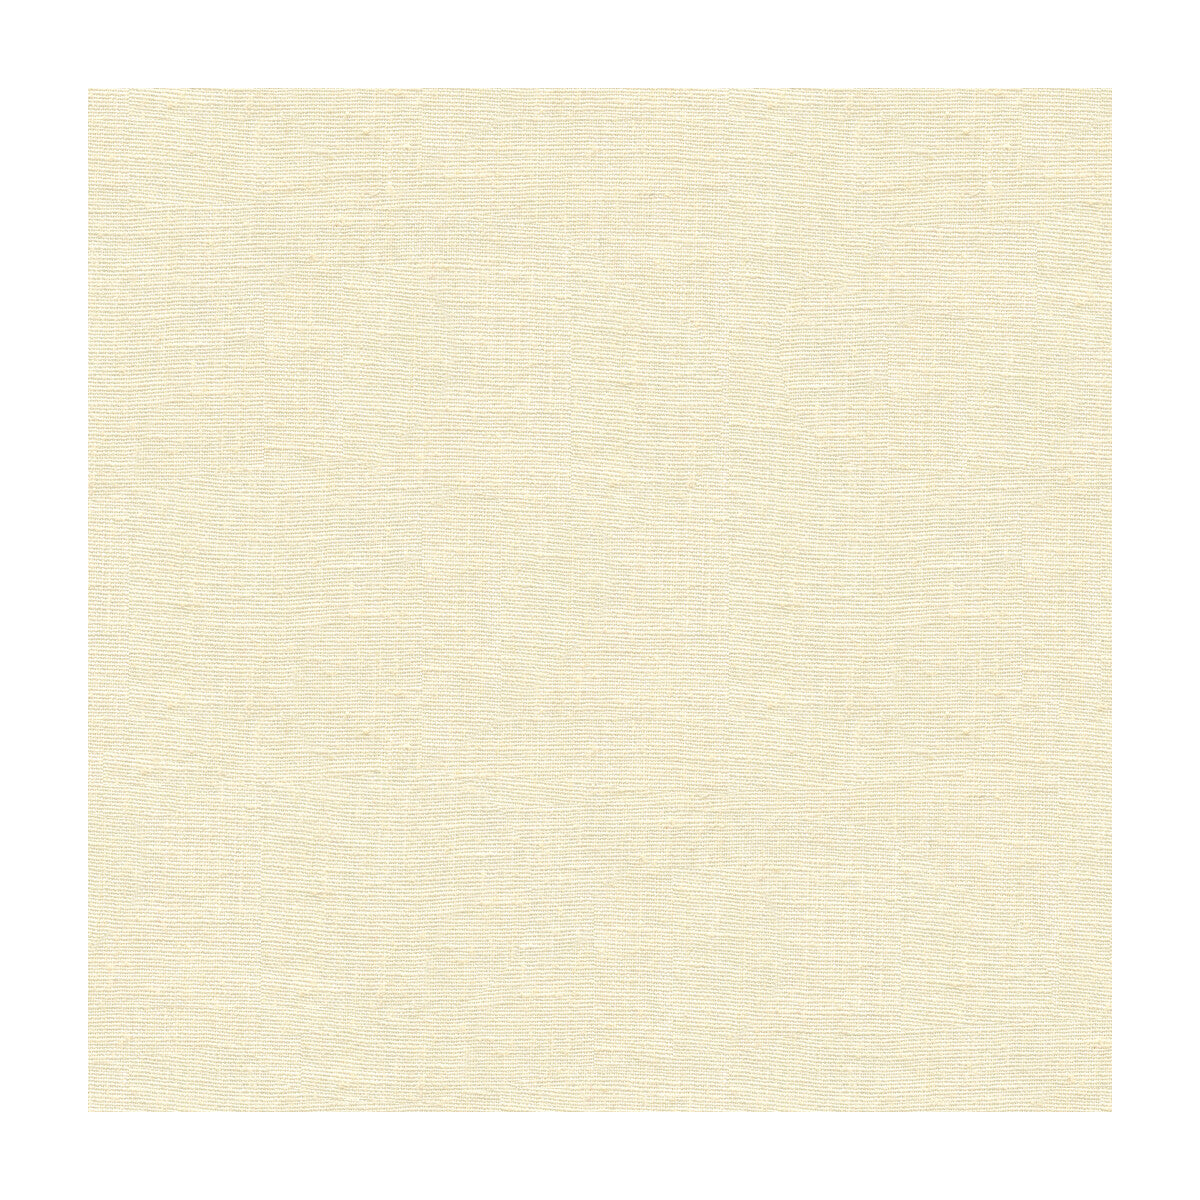 Dublin fabric in cream color - pattern 32344.111.0 - by Kravet Basics in the Perfect Plains collection